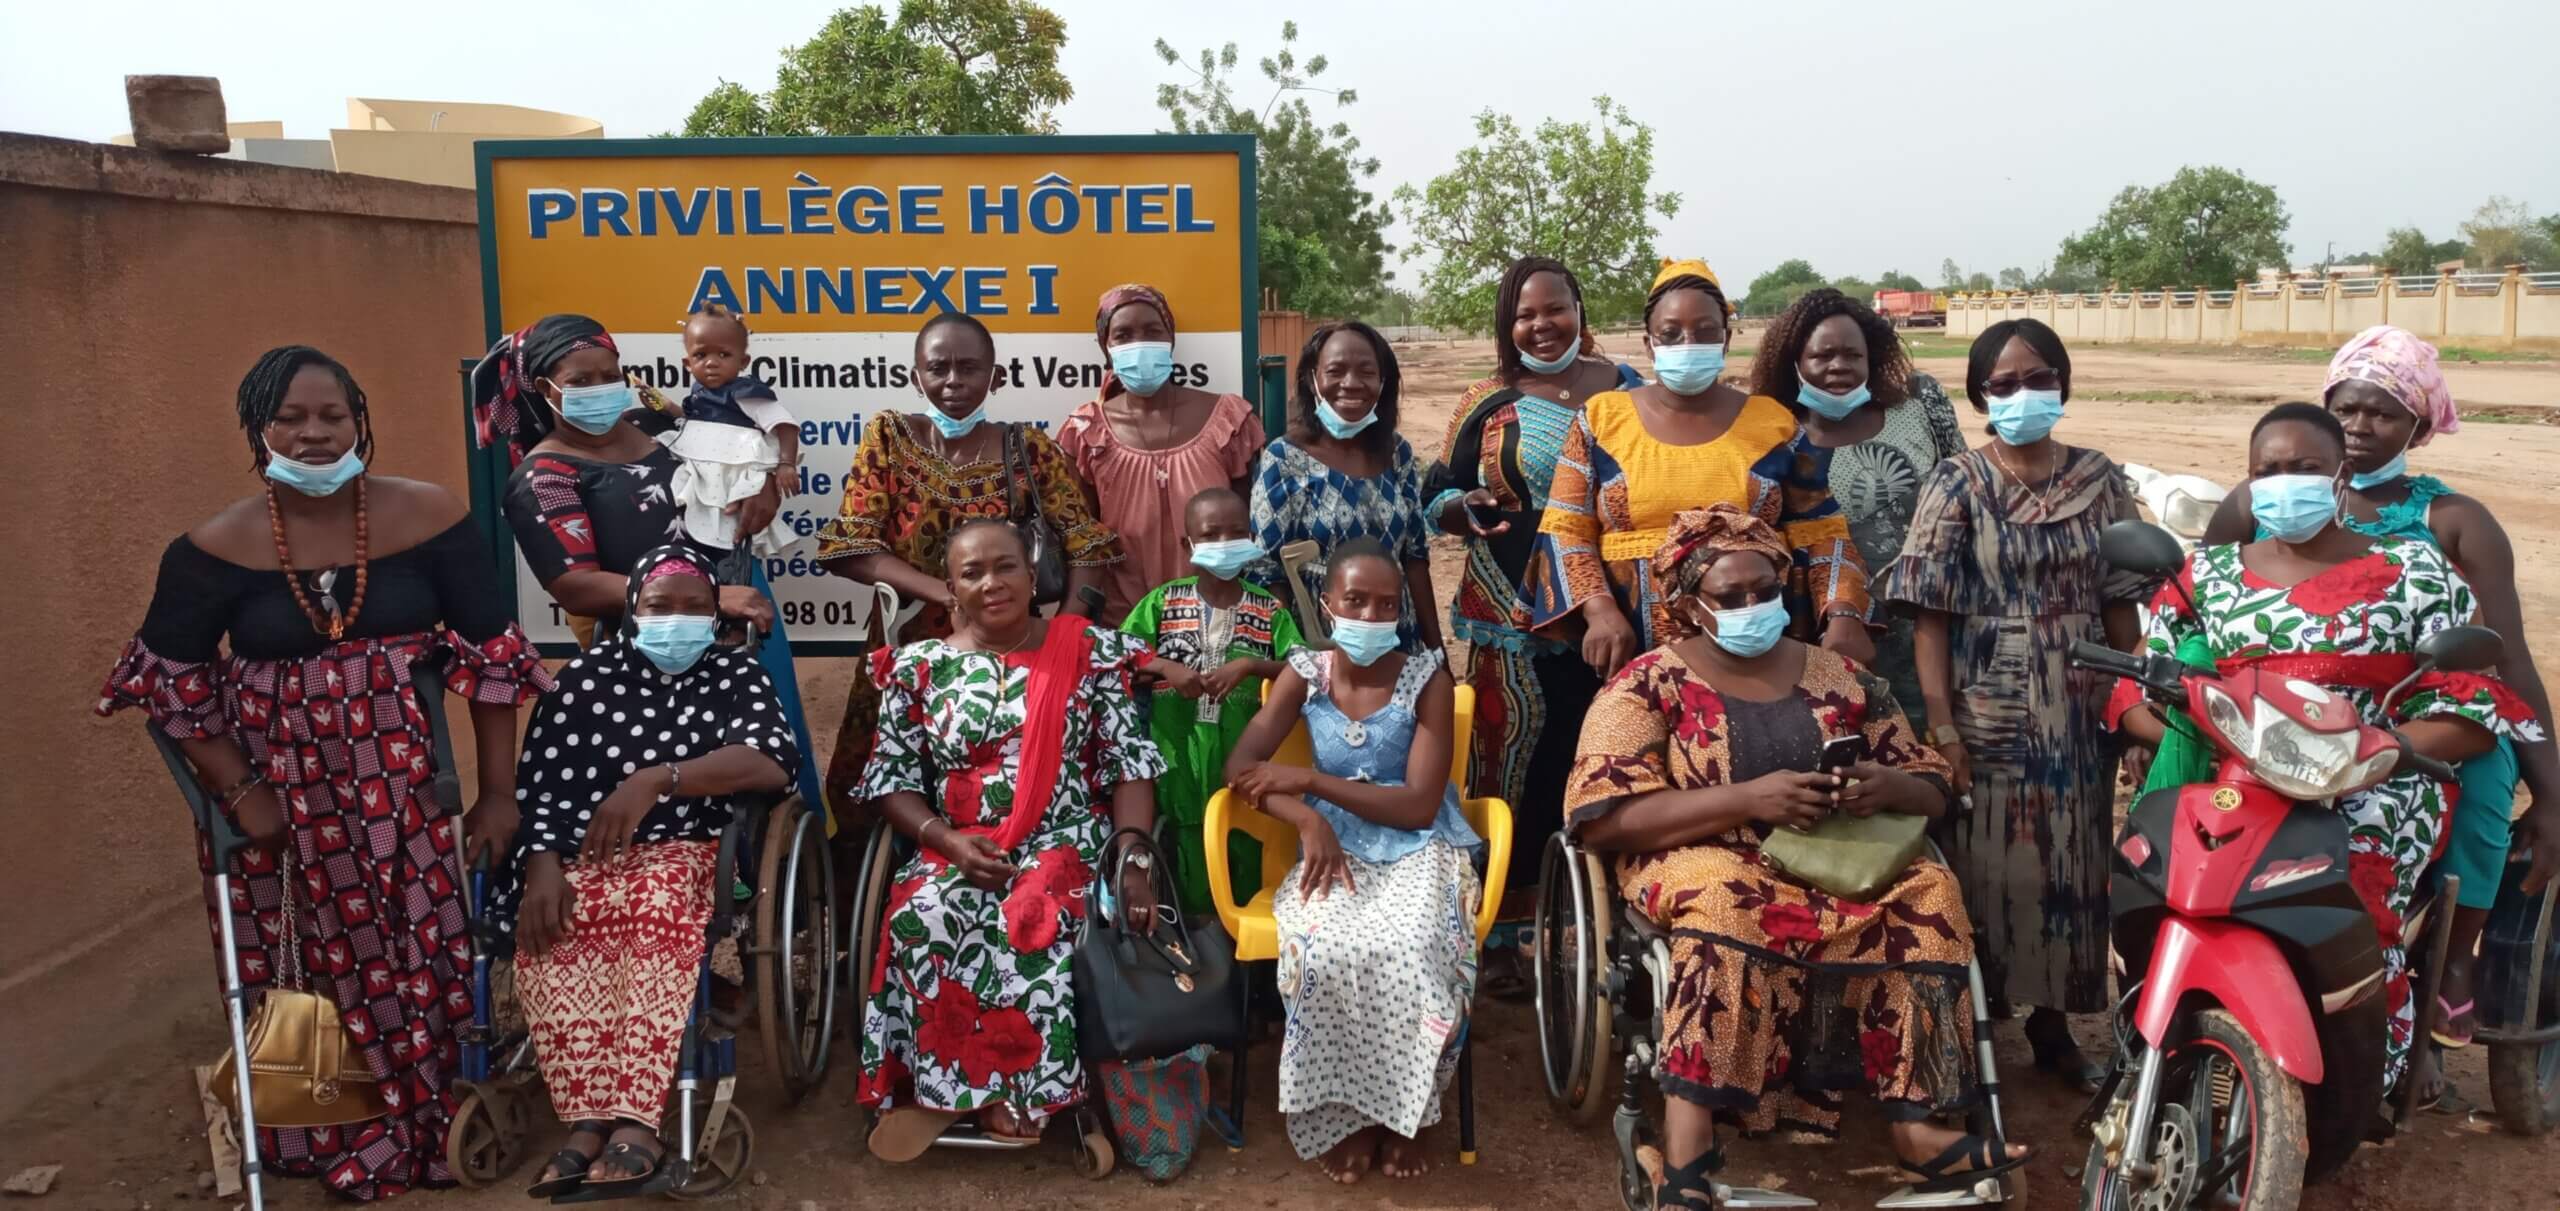 Celebrating International Day of People with Disabilities. The image shows the National Union of Women with Disabilities of Burkina Faso (UNAFEHB) outside. They are all wearing colourful clothes and face masks, some standing and some sitting in wheelchairs.